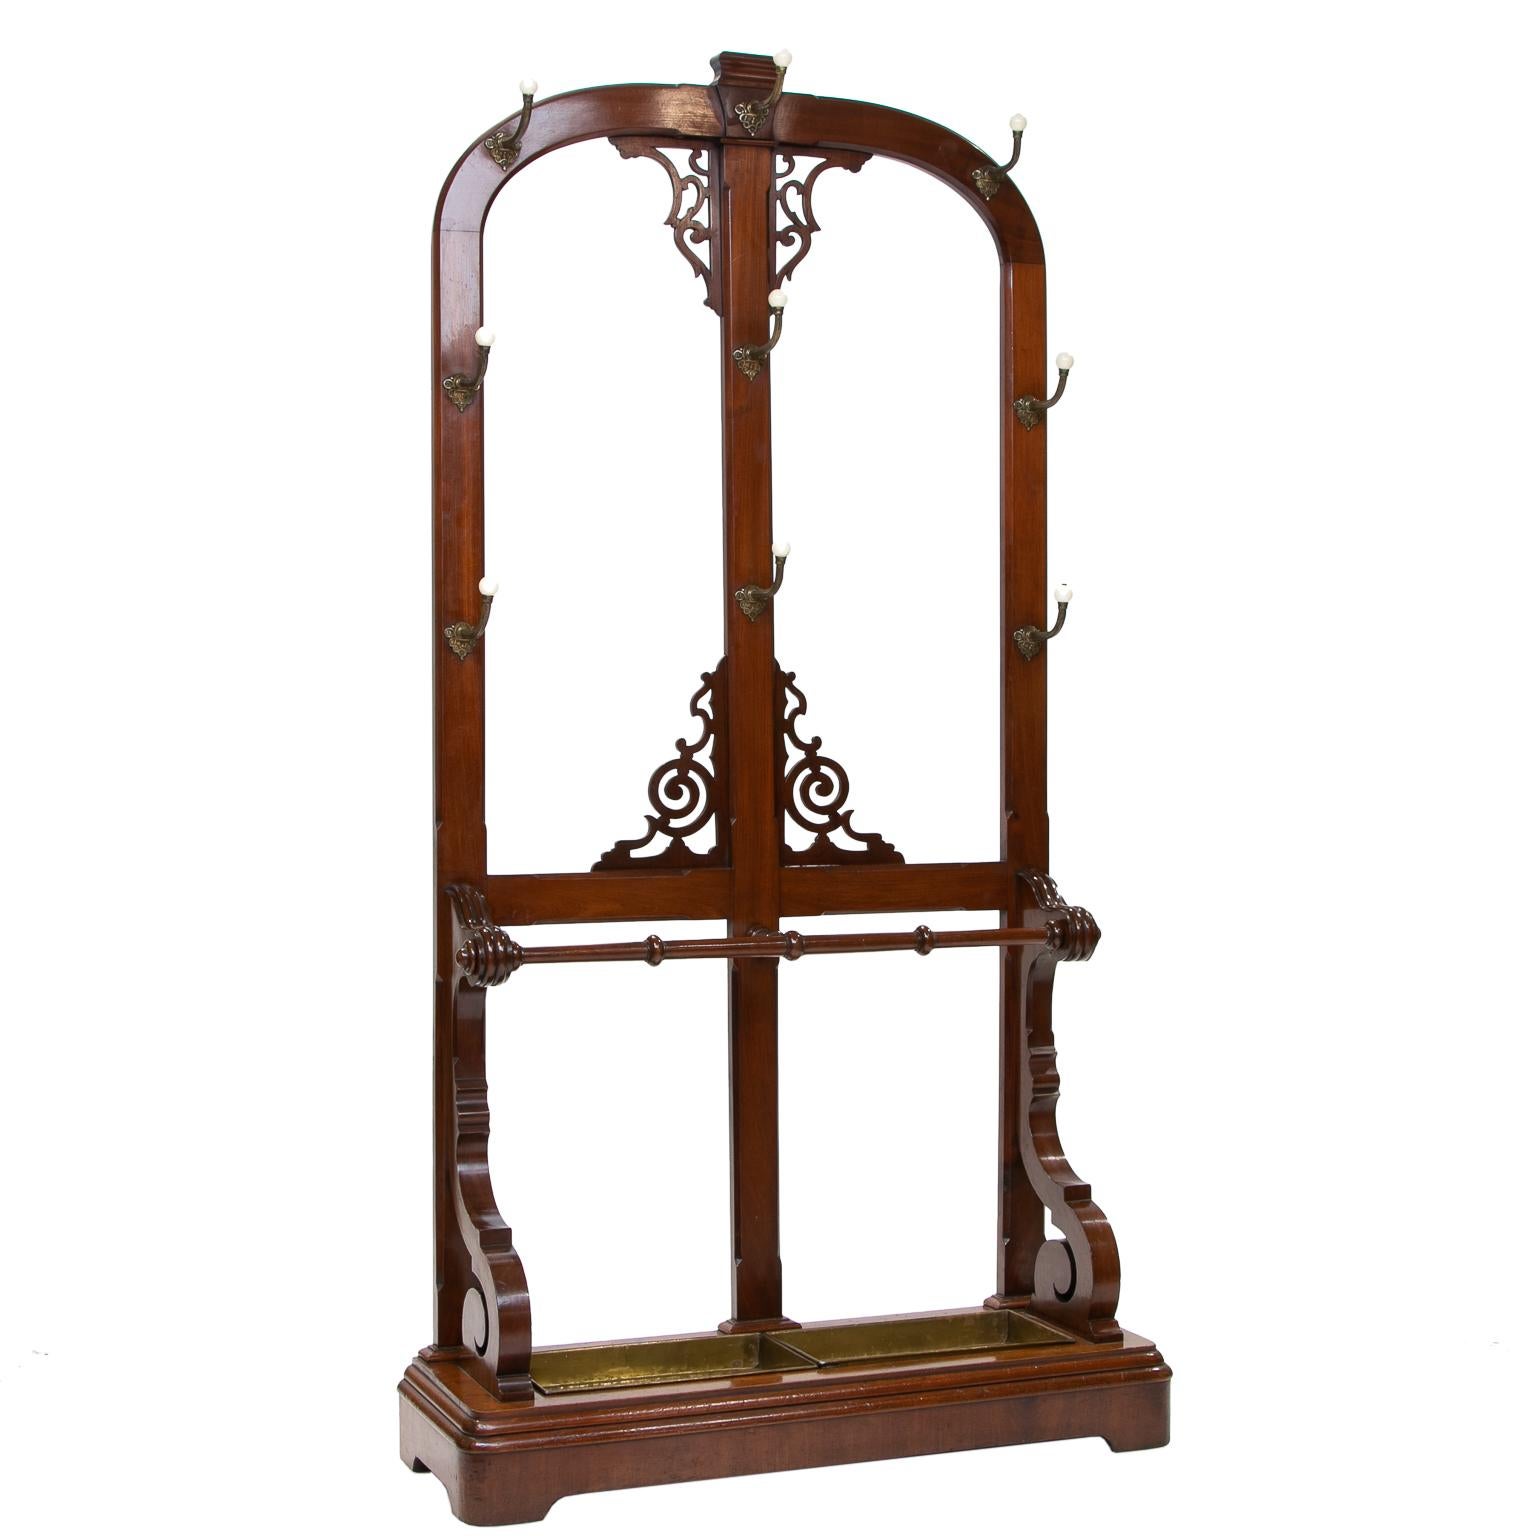 English hall stand, circa 1850
English mahogany hall stand from the 1850s. Solid mahogany frame with an arched top and elaborate pierced fretwork. There are nine decorative brass hooks and umbrella stand with brass drip trays. Turned stick stays